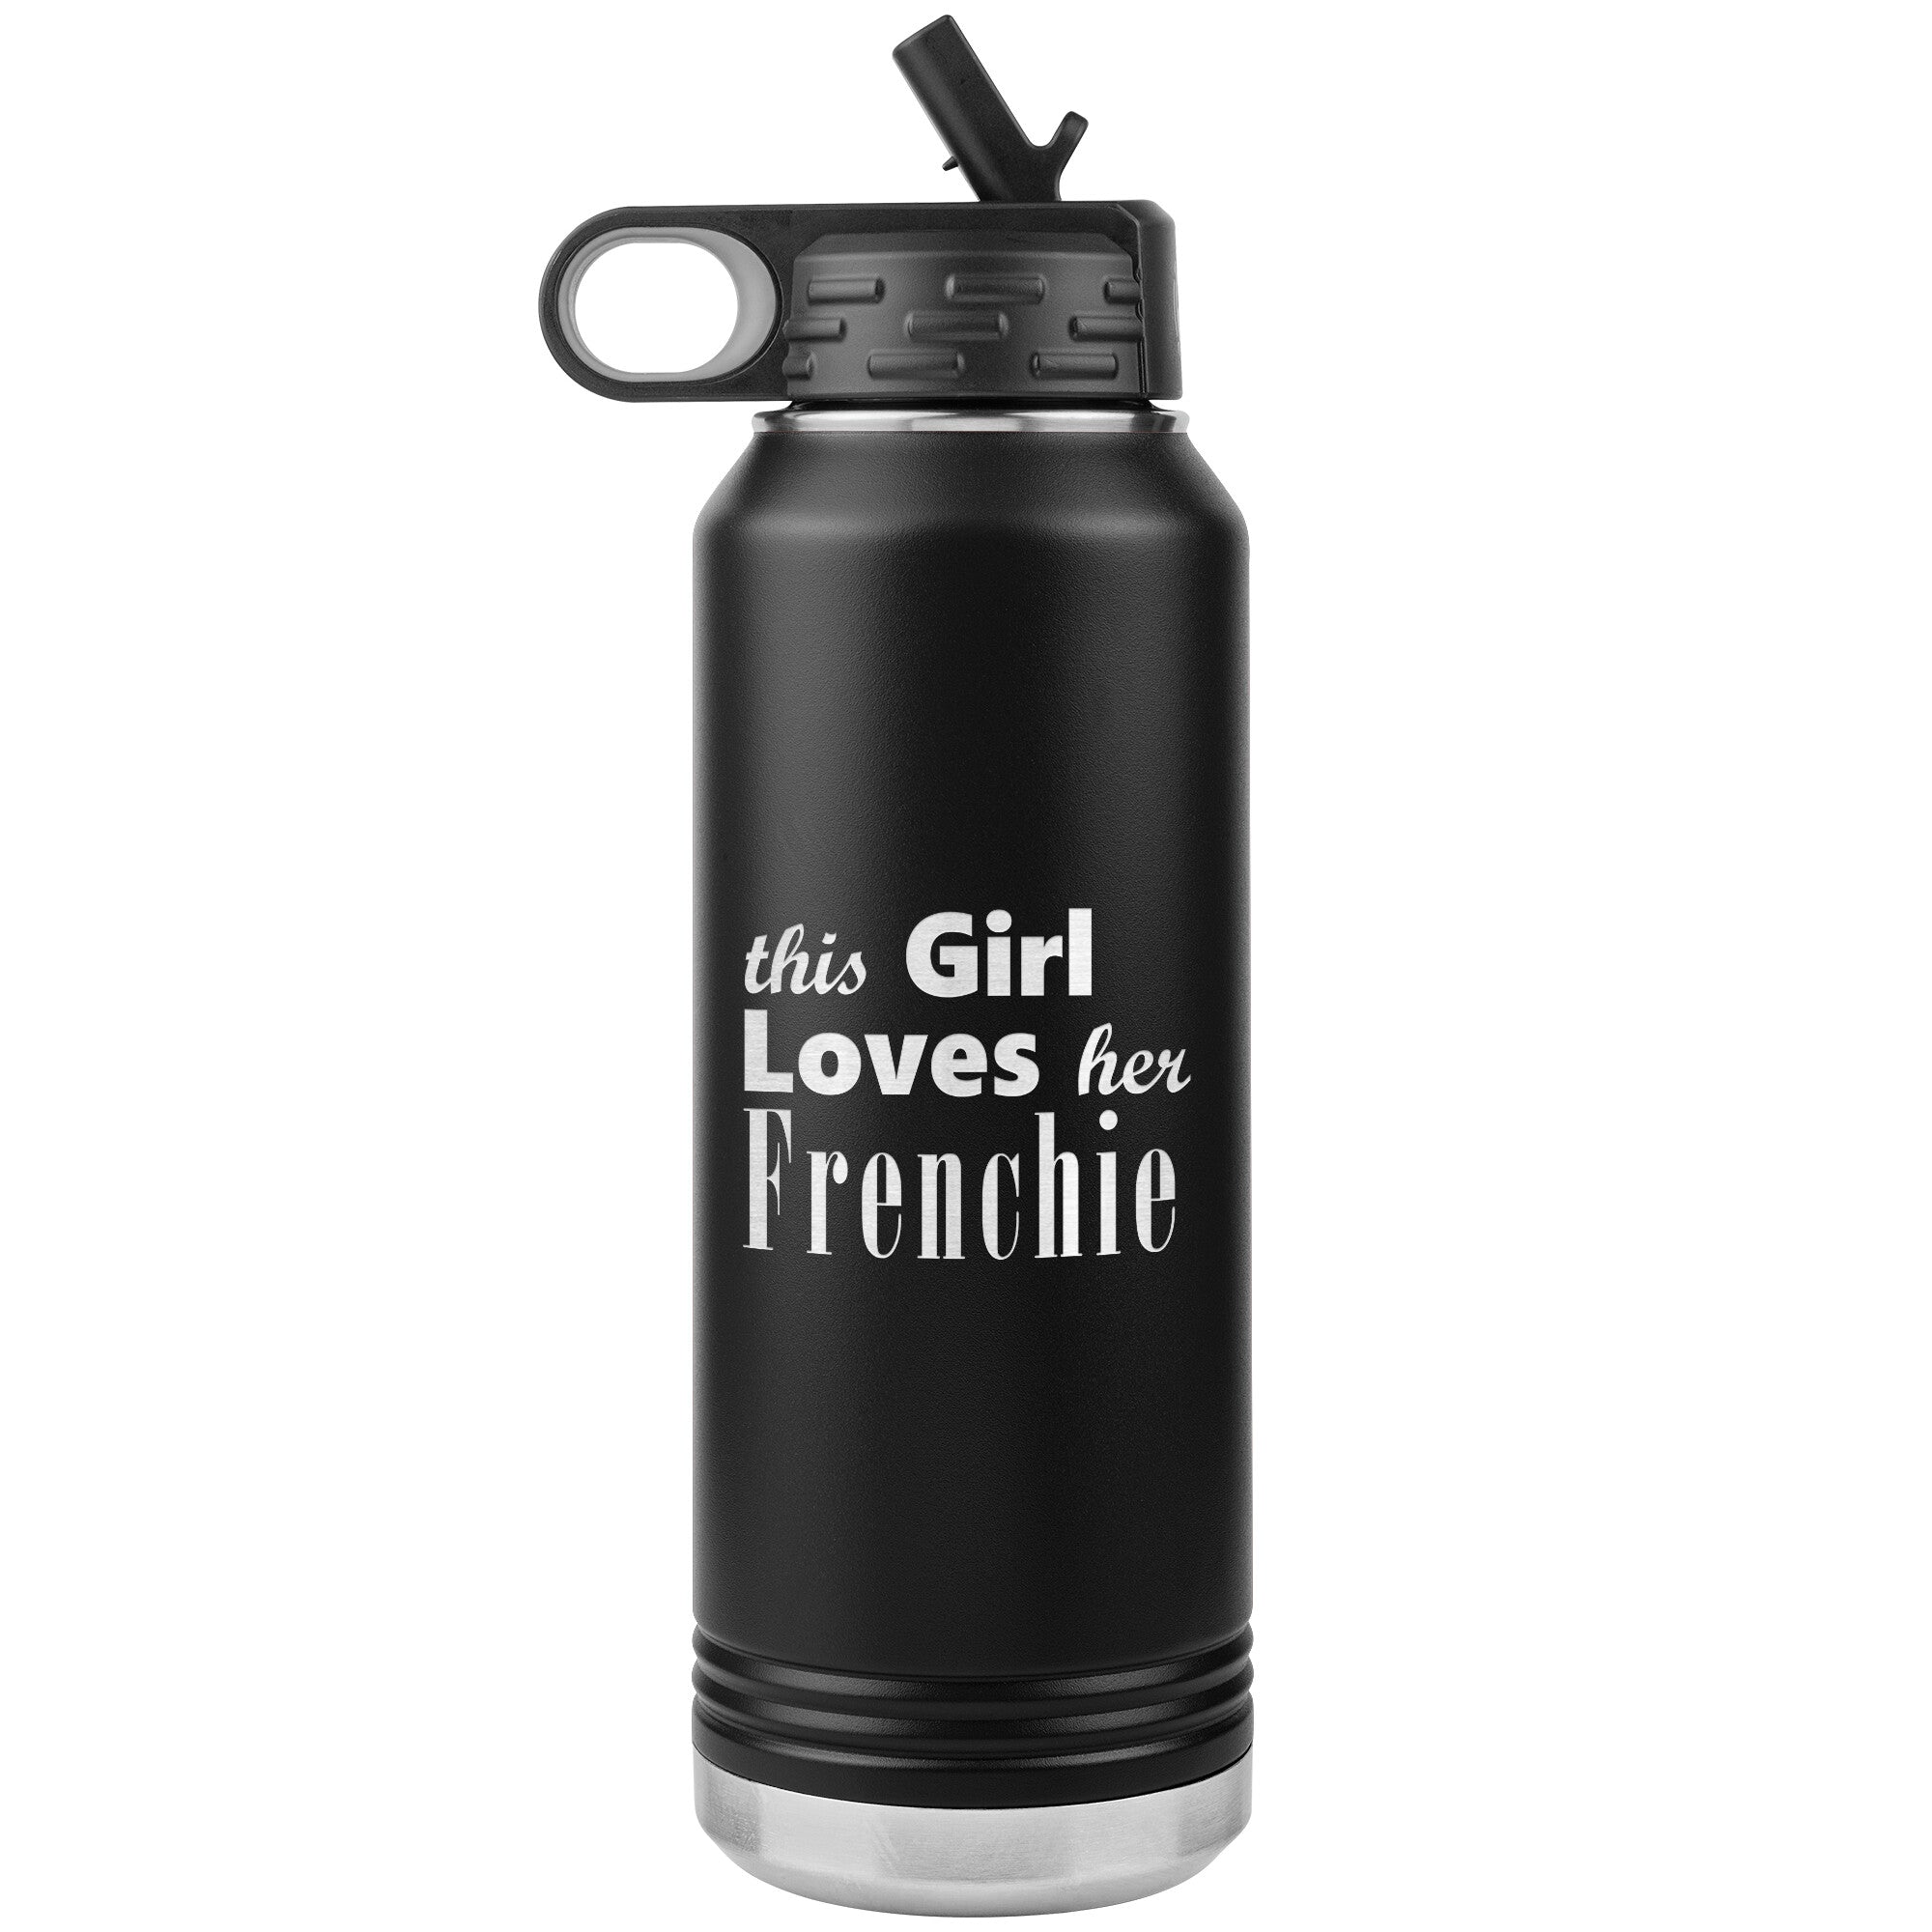 Frenchie - 32oz Insulated Water Bottle